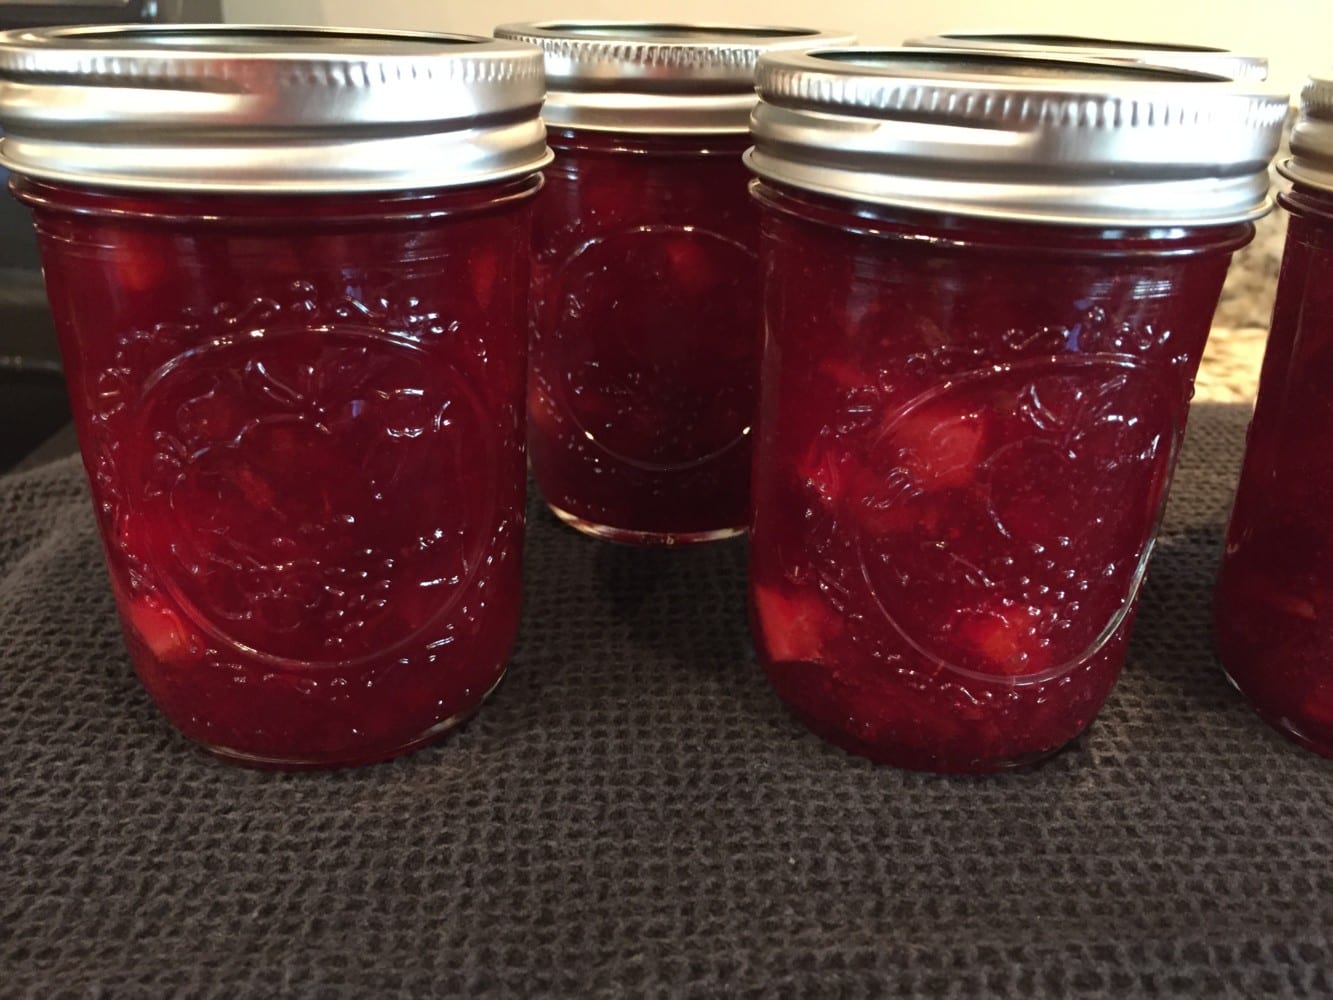 Participants will learn how to can Cranberry Apple Preserves during Clemson Extension's online canning seminar Sept. 30.